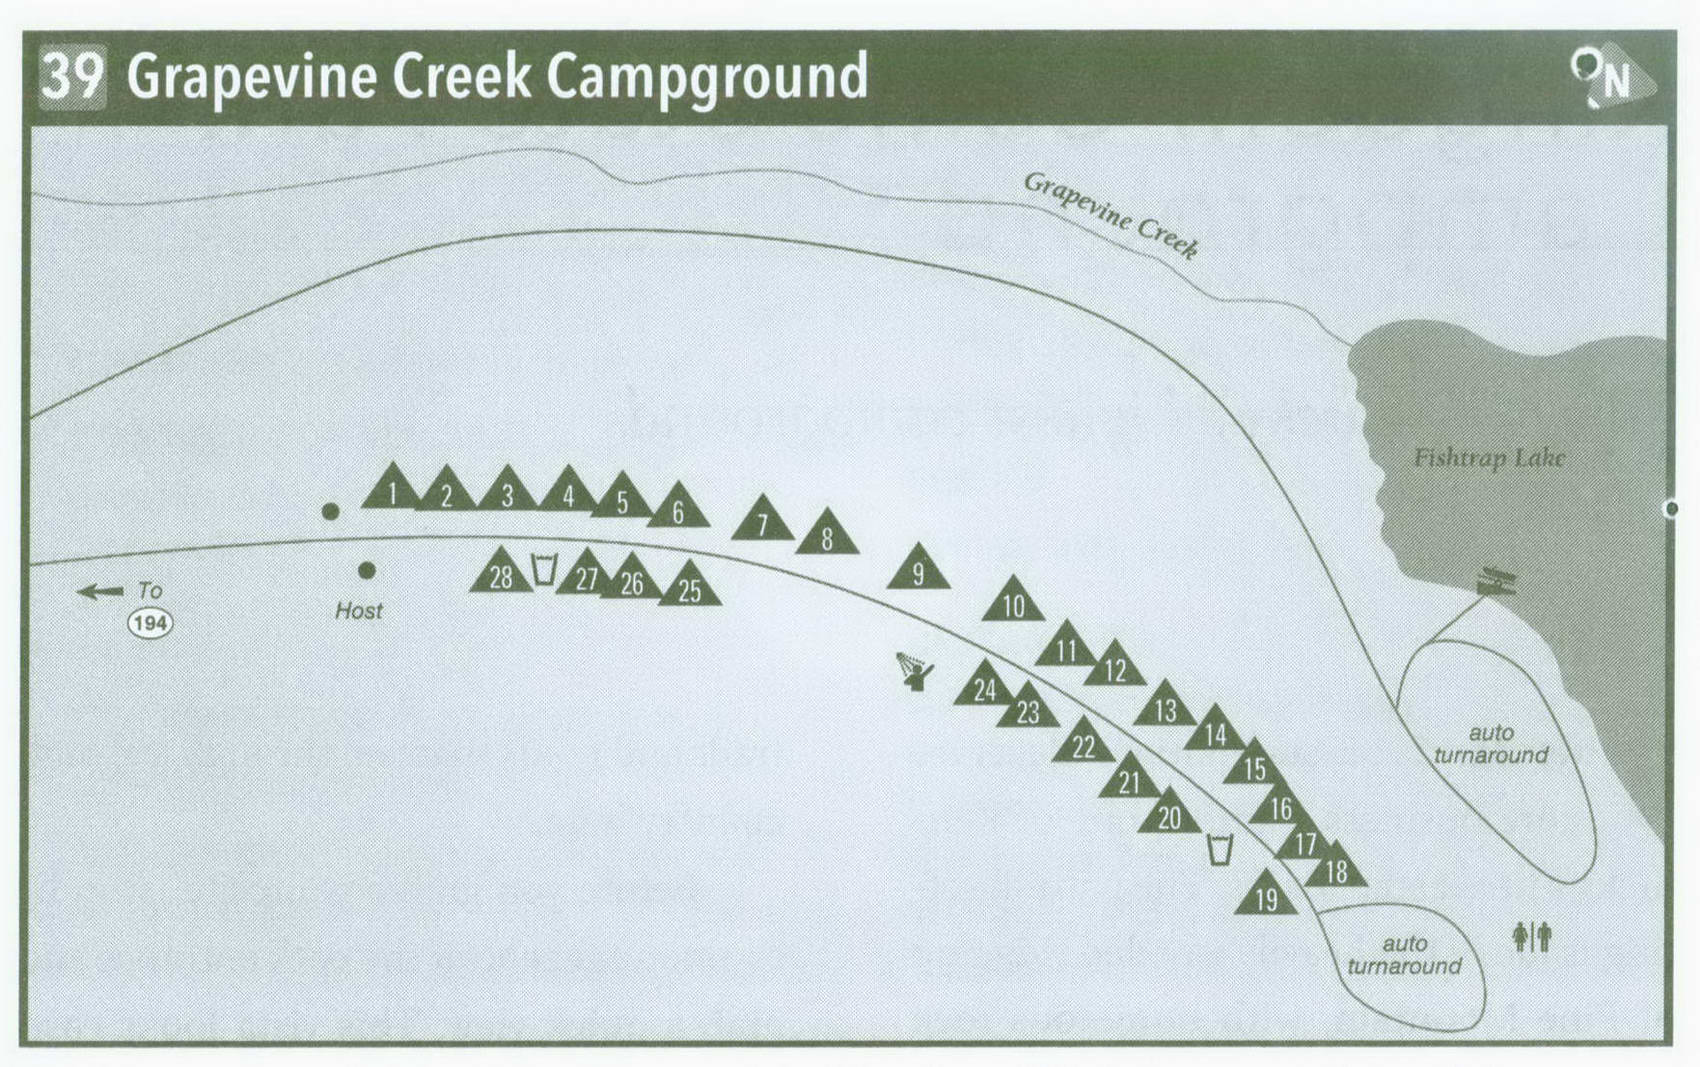 Plan of Grapevine Creek Campground